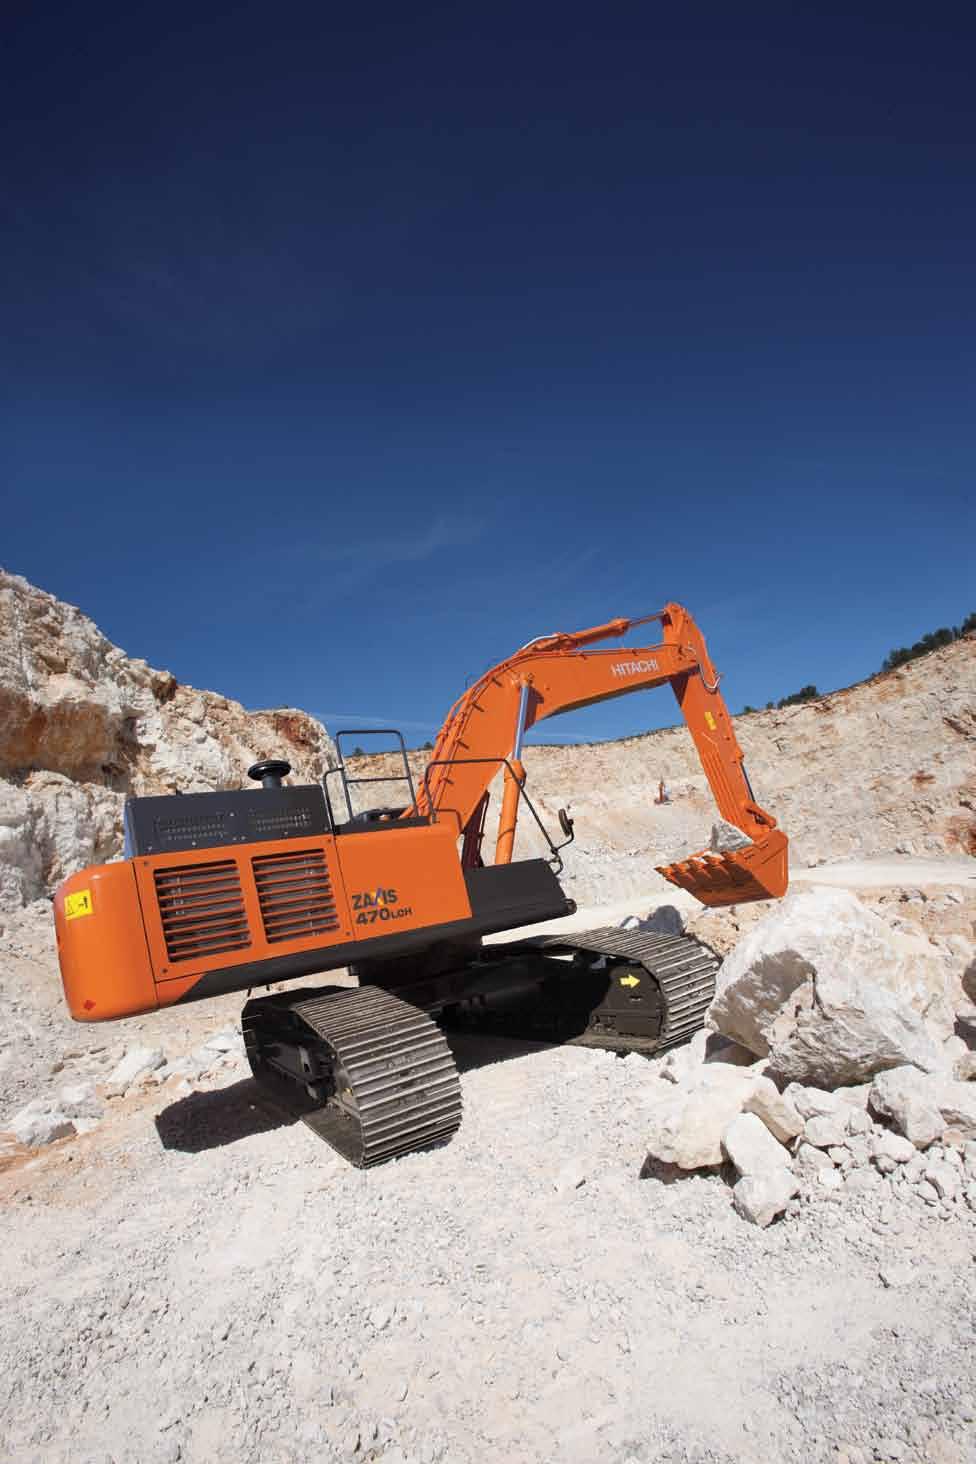 Reliability in the toughest conditions Durable parts Our large excavators have been designed to deliver increased levels of availability and productivity even on the toughest job sites.